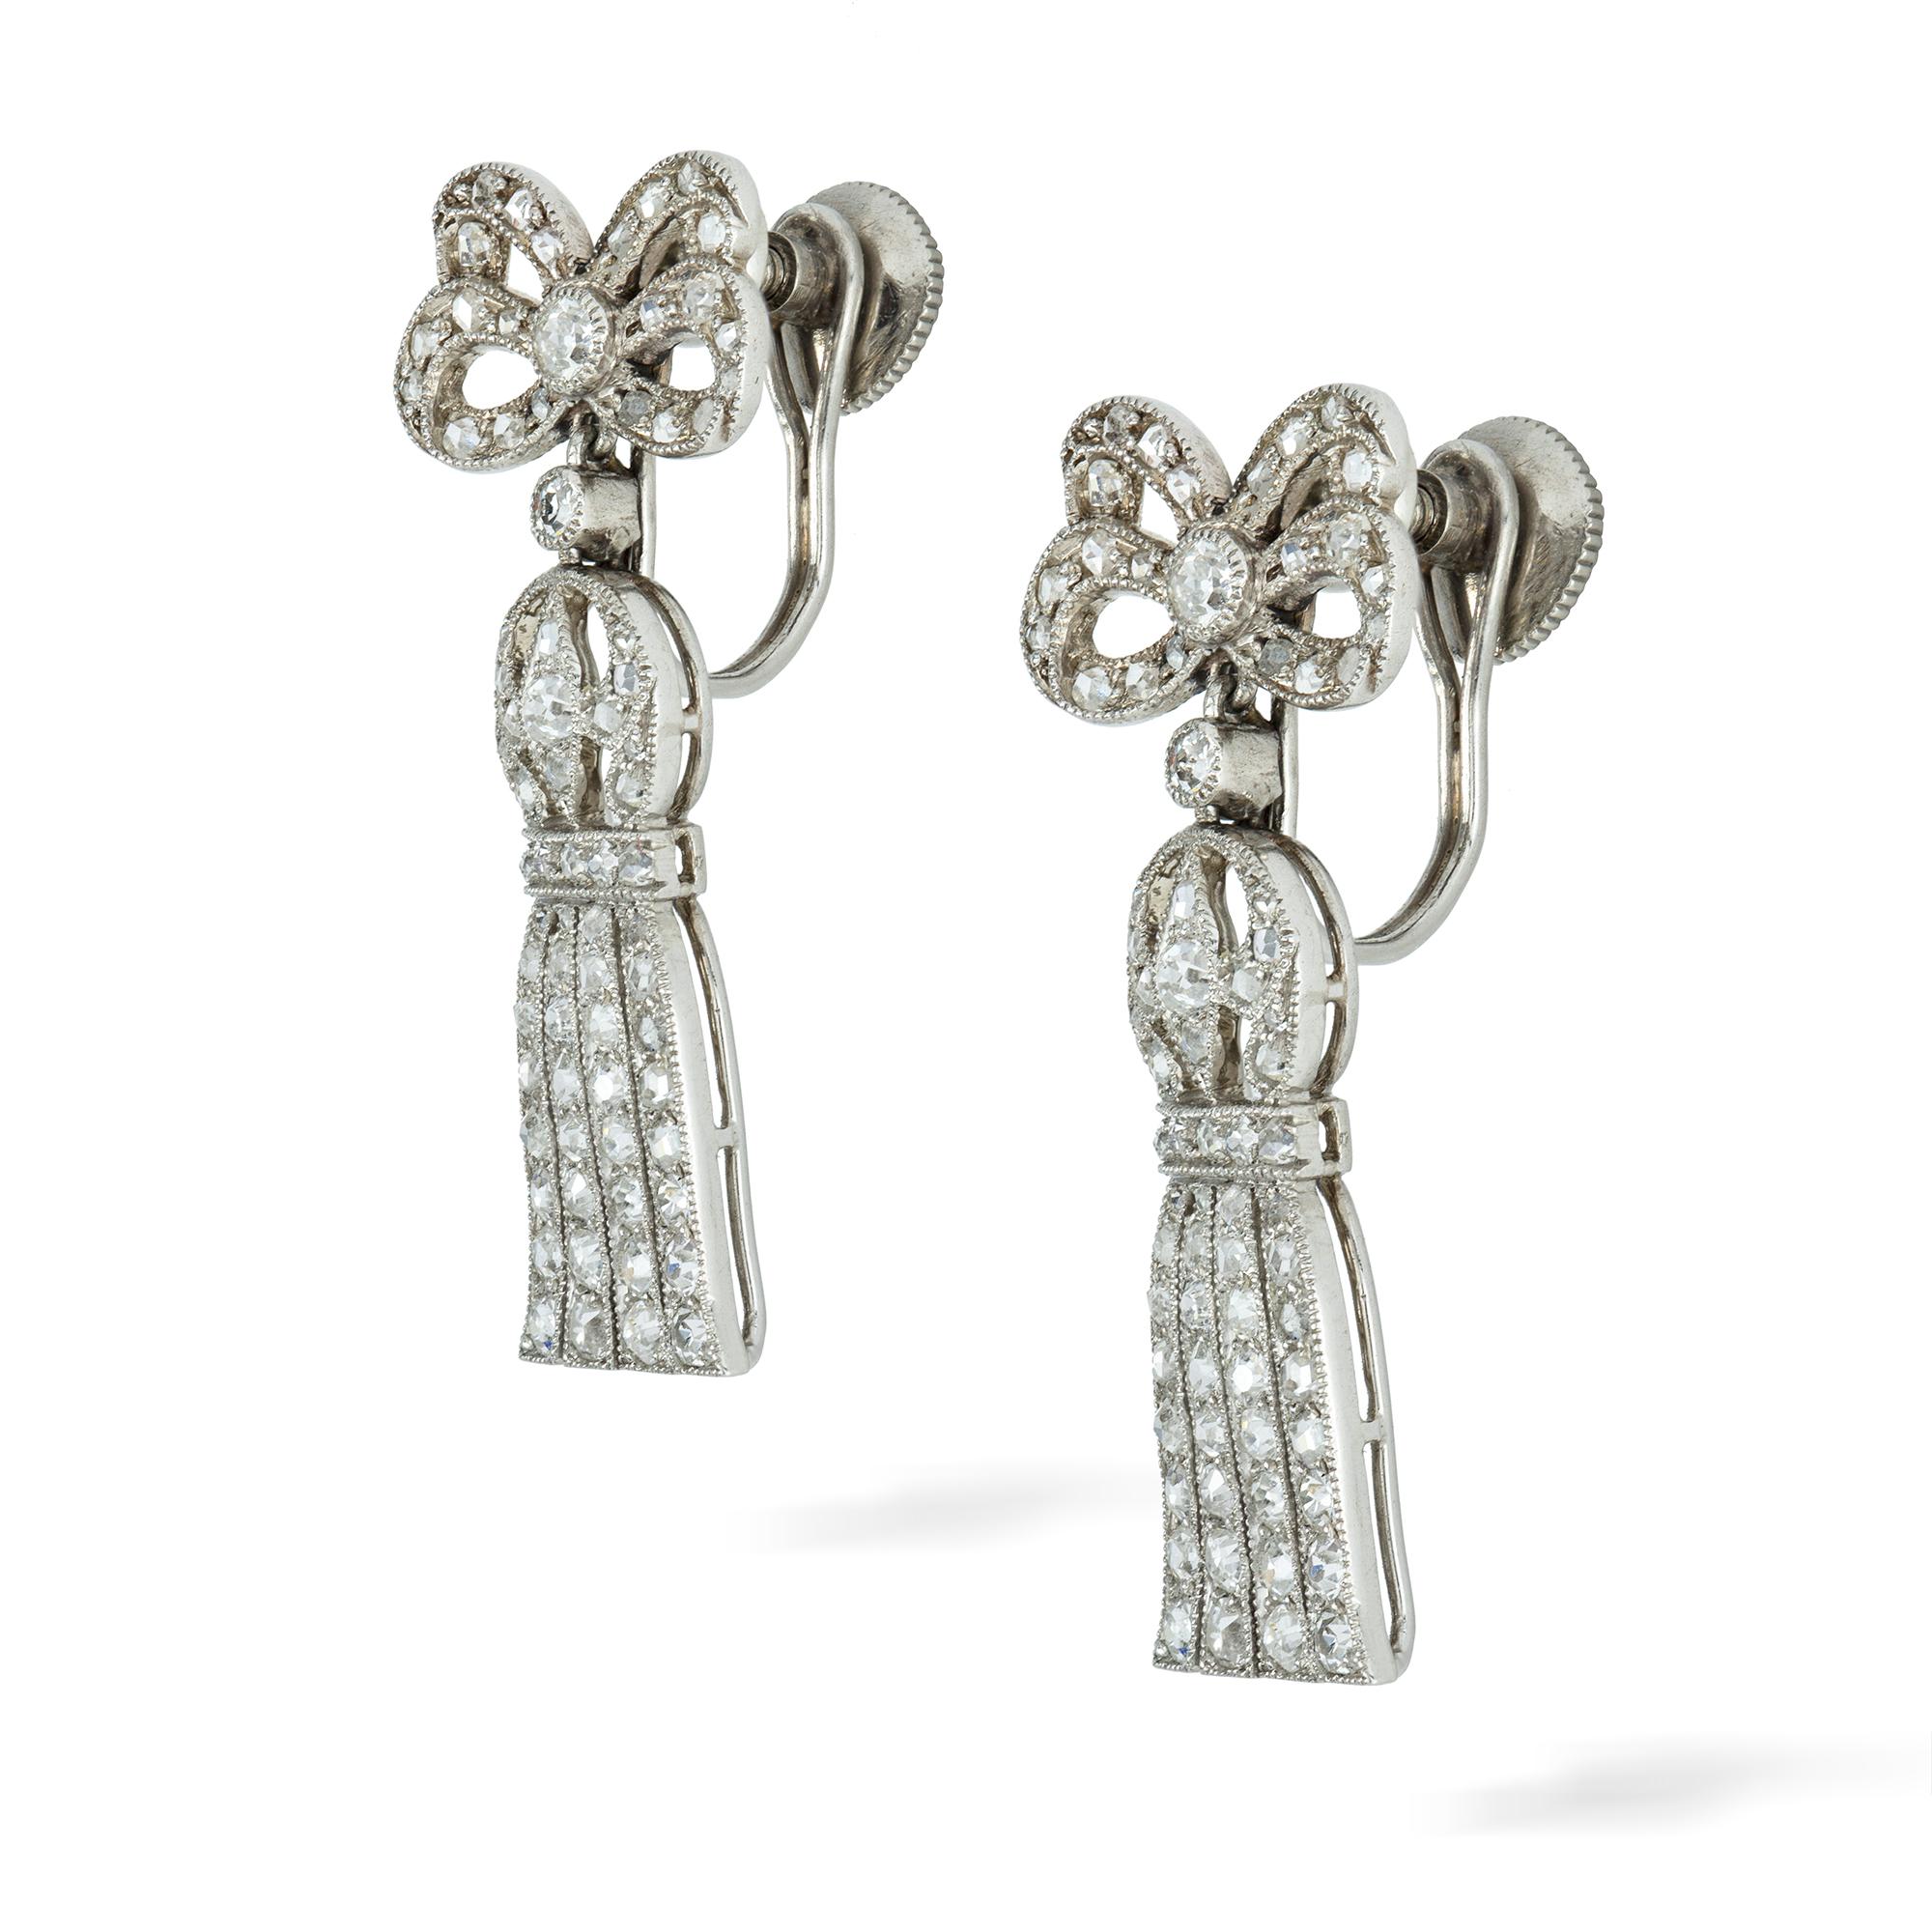 A pair of Edwardian diamond drop earrings, the ribbon bow motif suspending an open work tassel, set throughout with old- and rose-cut diamonds, all in a platinum millegrain setting, circa 1910, measuring approximately 3x1.1cm, gross weight 6.5